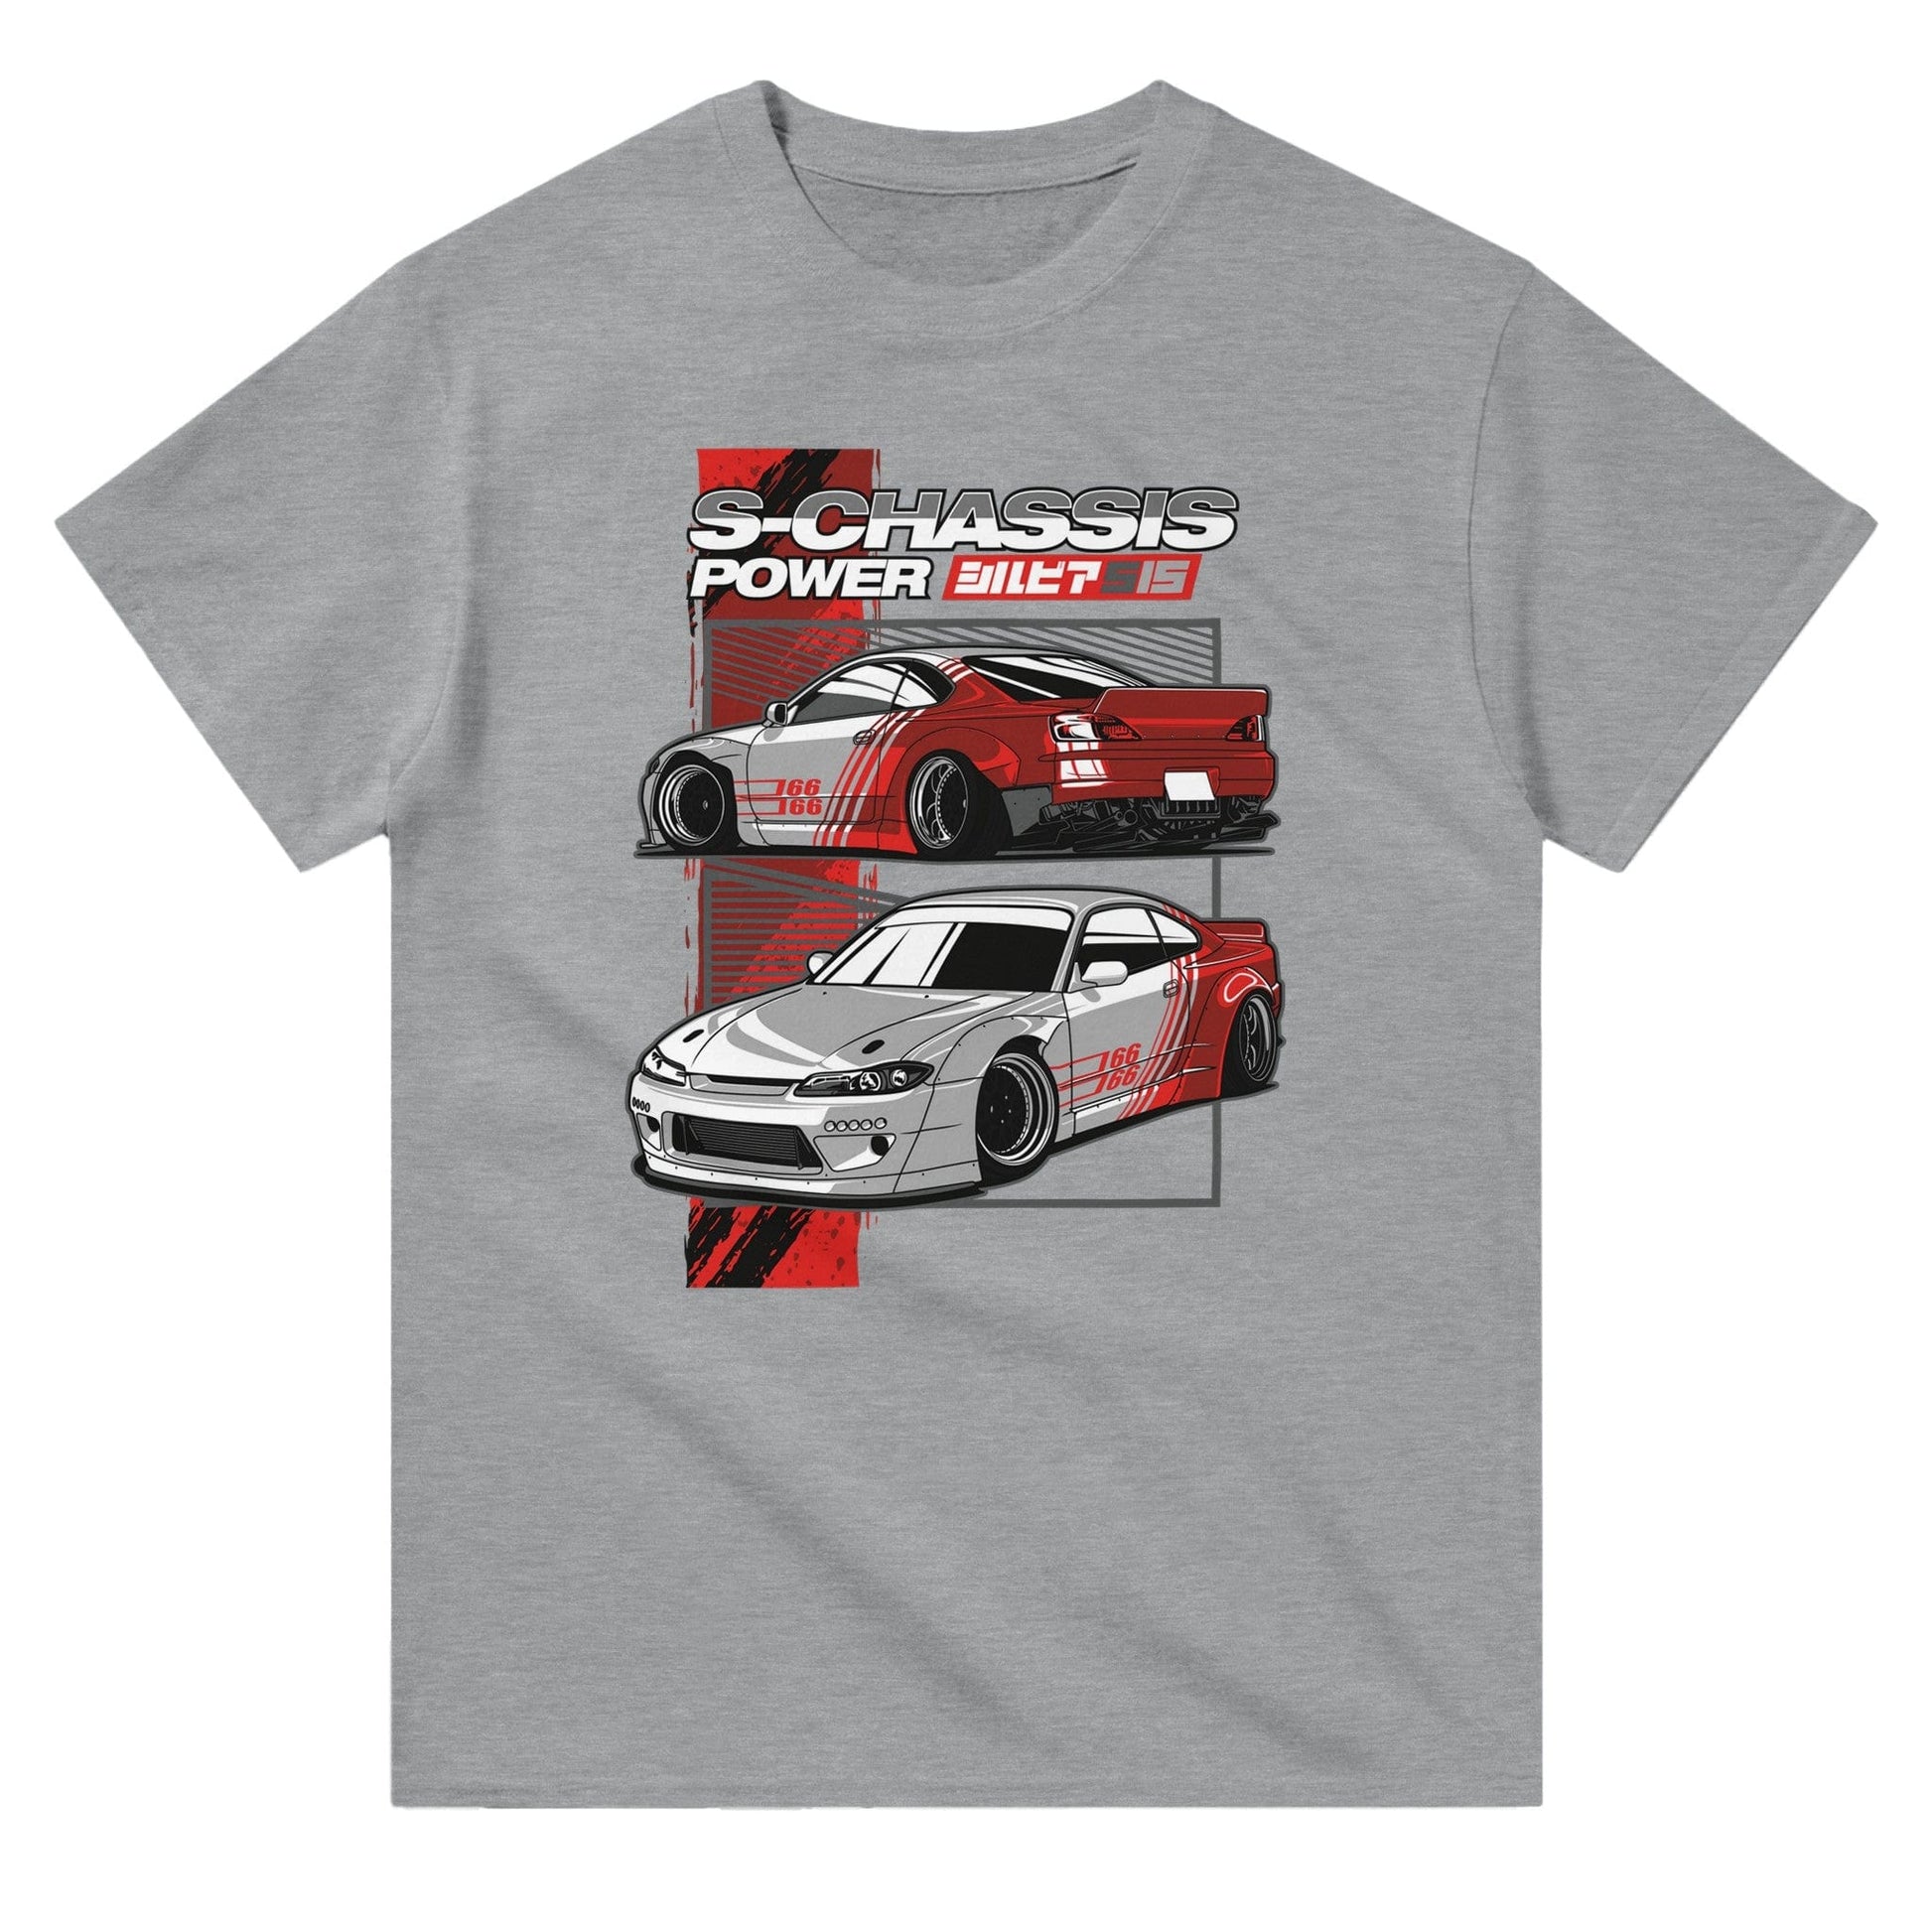 S-Chassis Power Silvia S15 T-shirt Australia Online Color Sports Grey / S